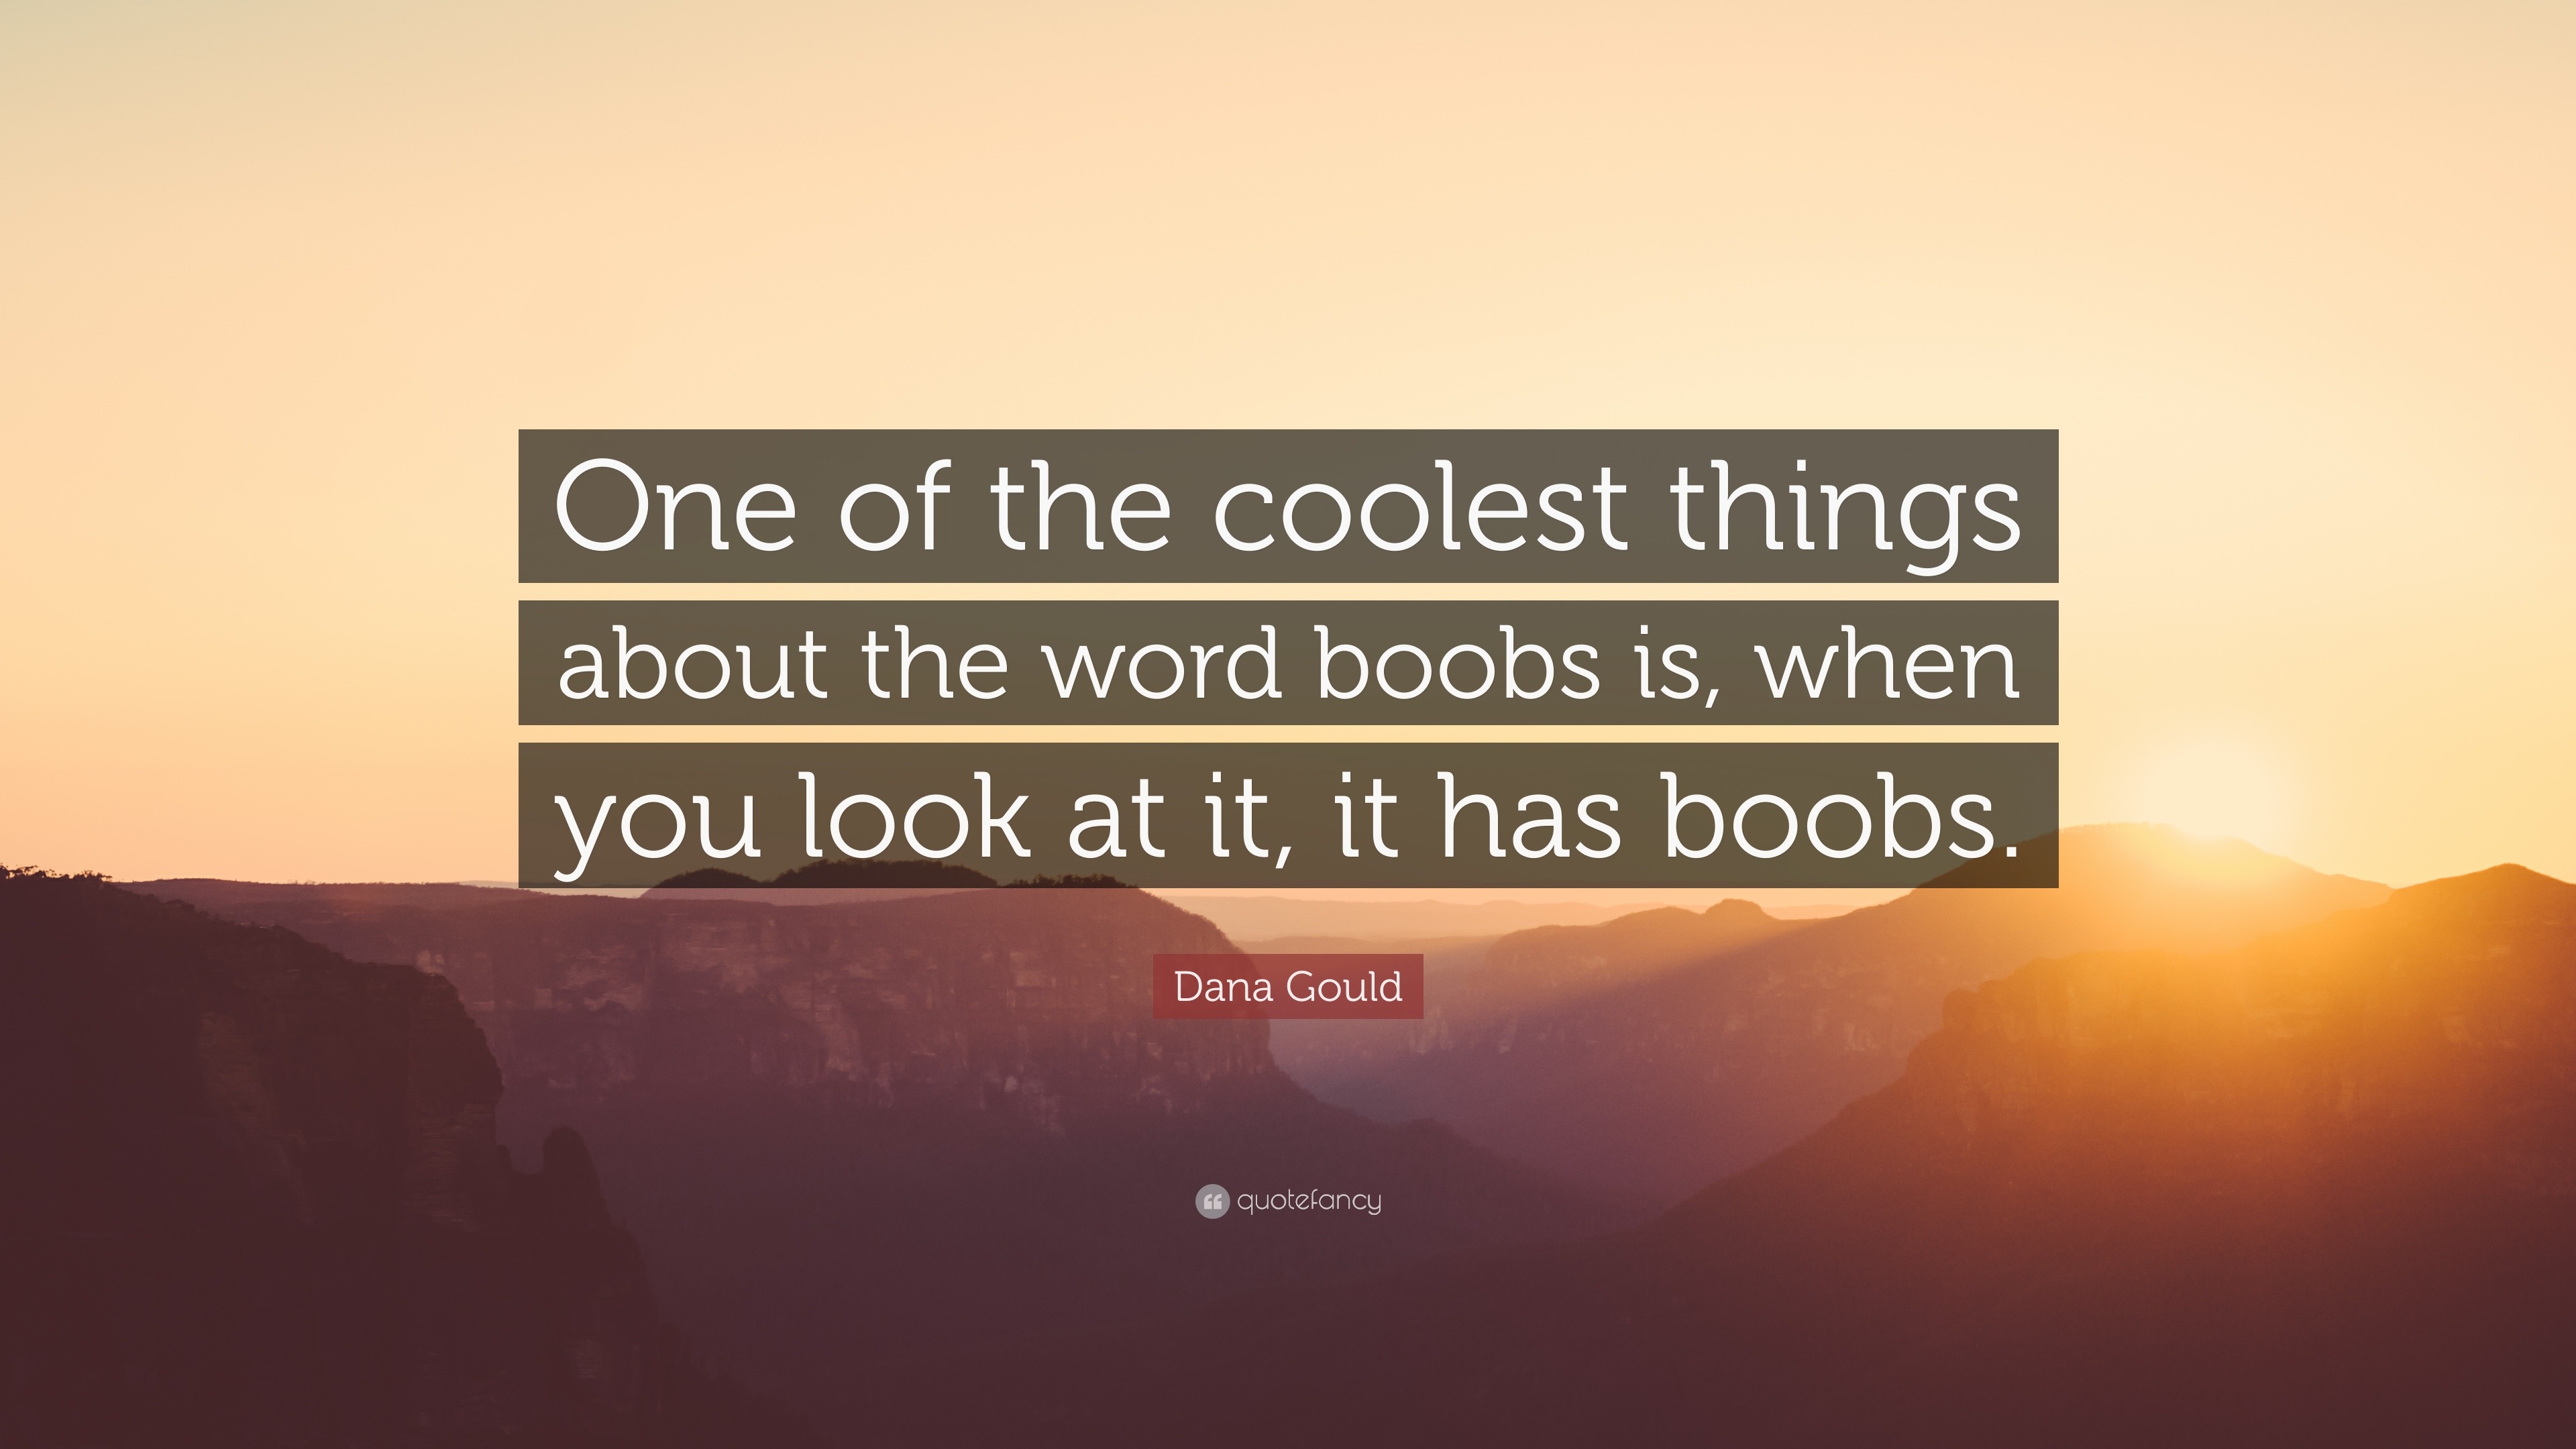 Dana Gould Quote: “One of the coolest things about the word boobs